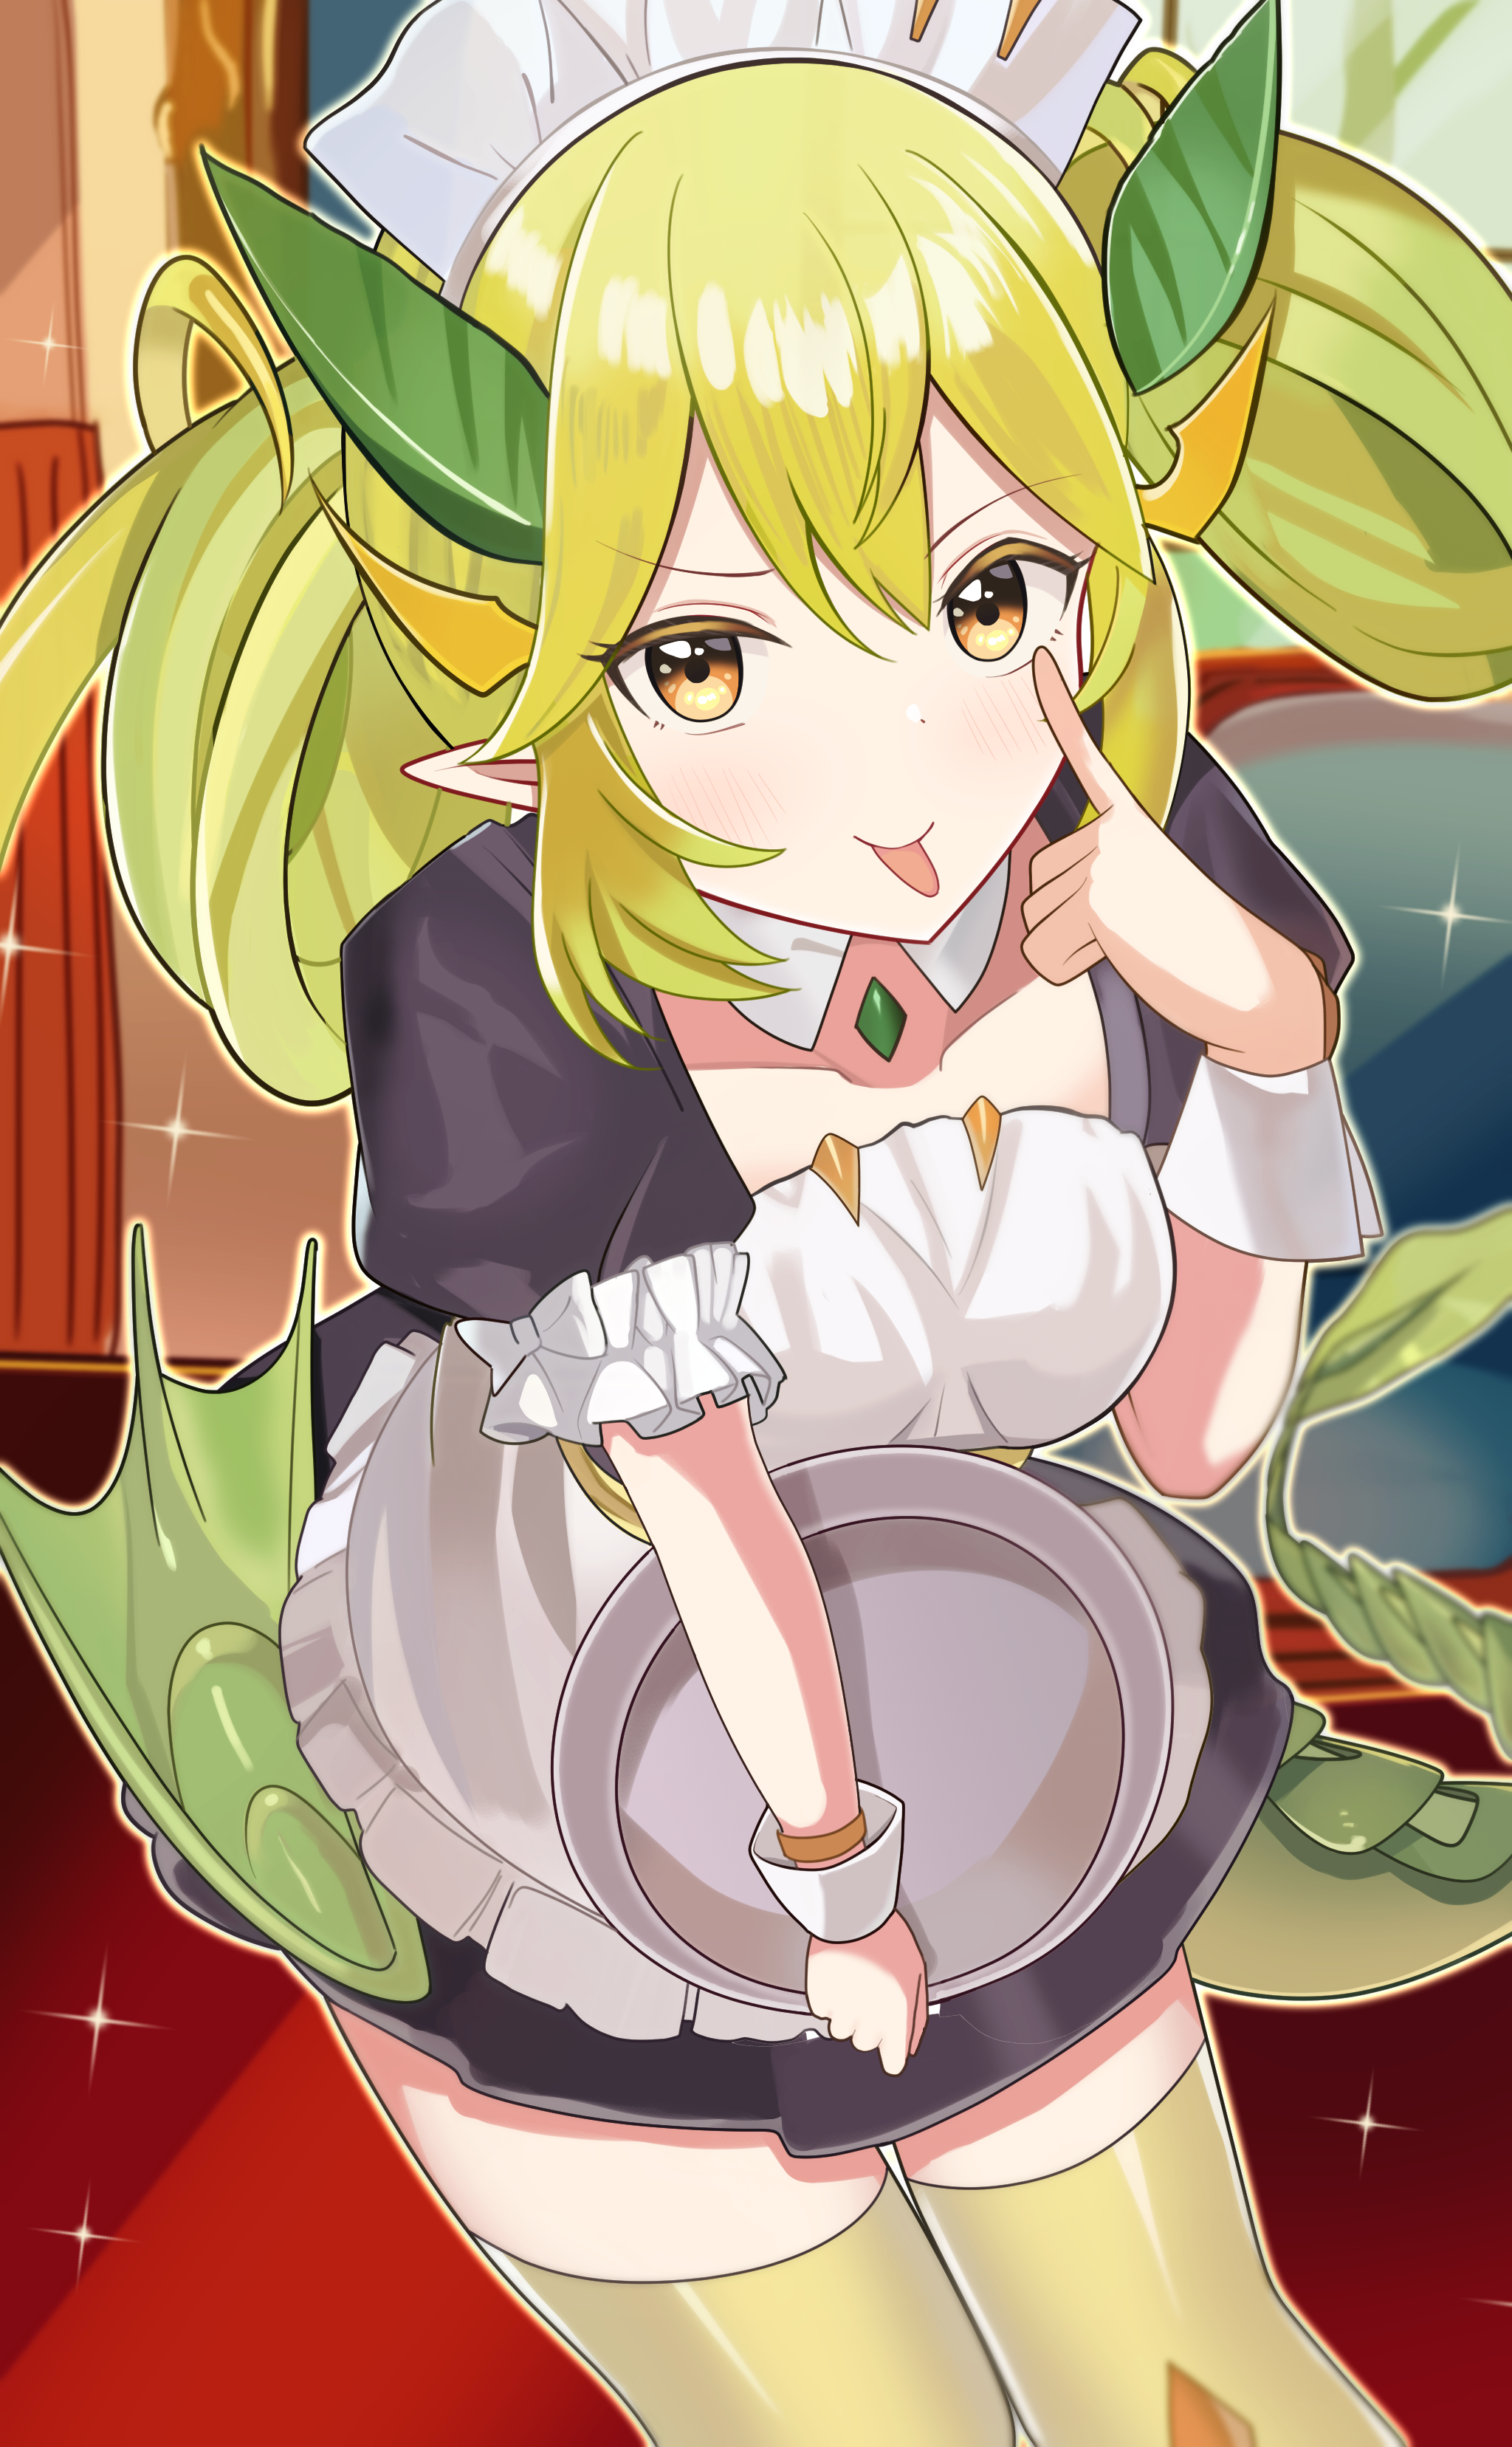 Anime 2048x3314 anime anime girls Trading Card Games Yu-Gi-Oh! Parlor Dragonmaid twintails green hair maid maid outfit solo artwork digital art fan art tongue out